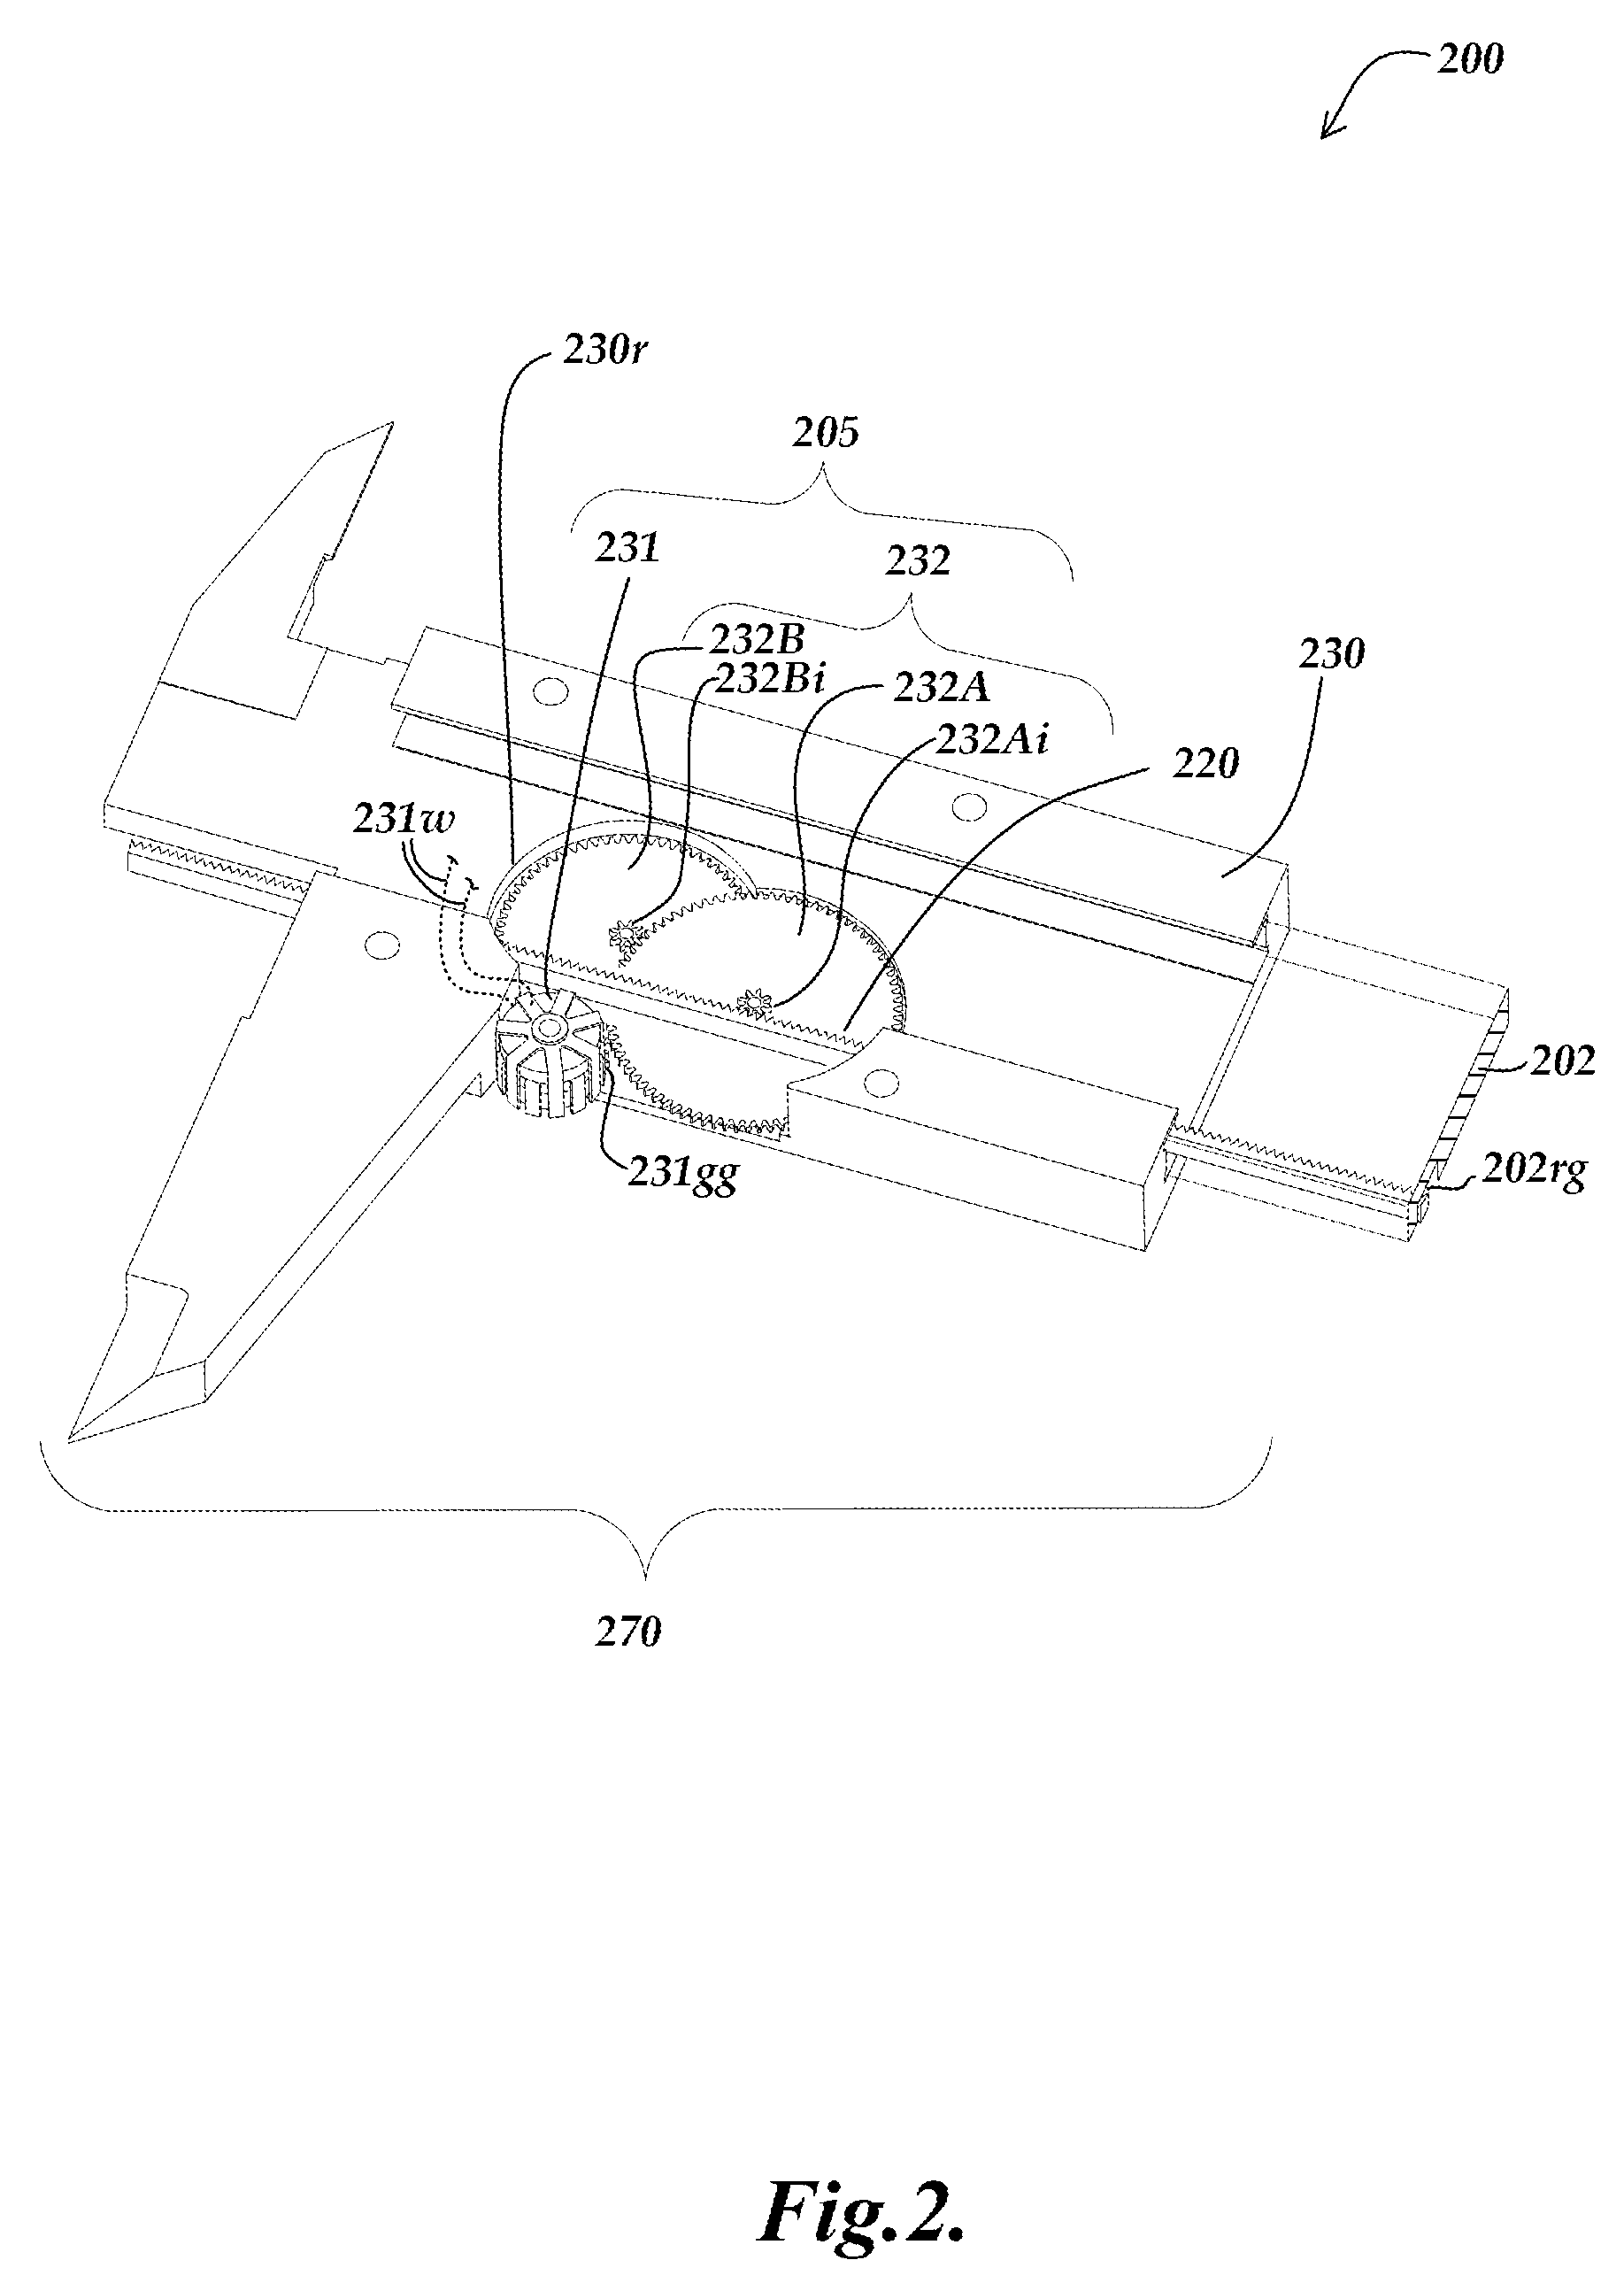 Electronic caliper configured to generate power for measurement operations